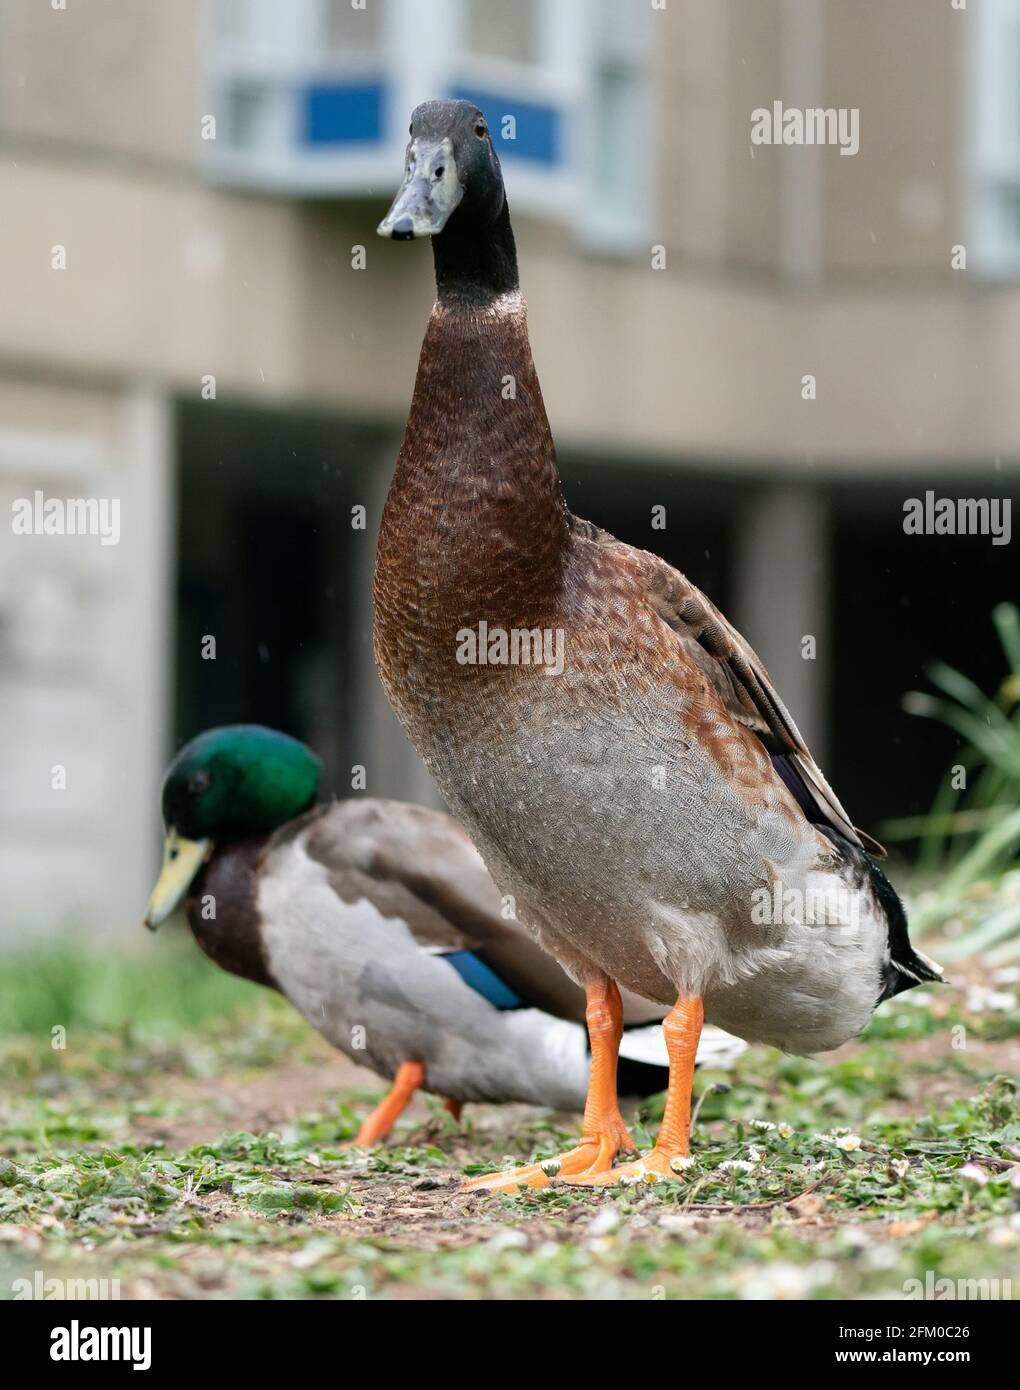 York university campus duck named Long Boi (right) who went viral due to his impressive stature. It is believed that the very large duck is a cross between a Mallard and an Indian Runner duck. Picture date: Monday May 3, 2021. Stock Photo